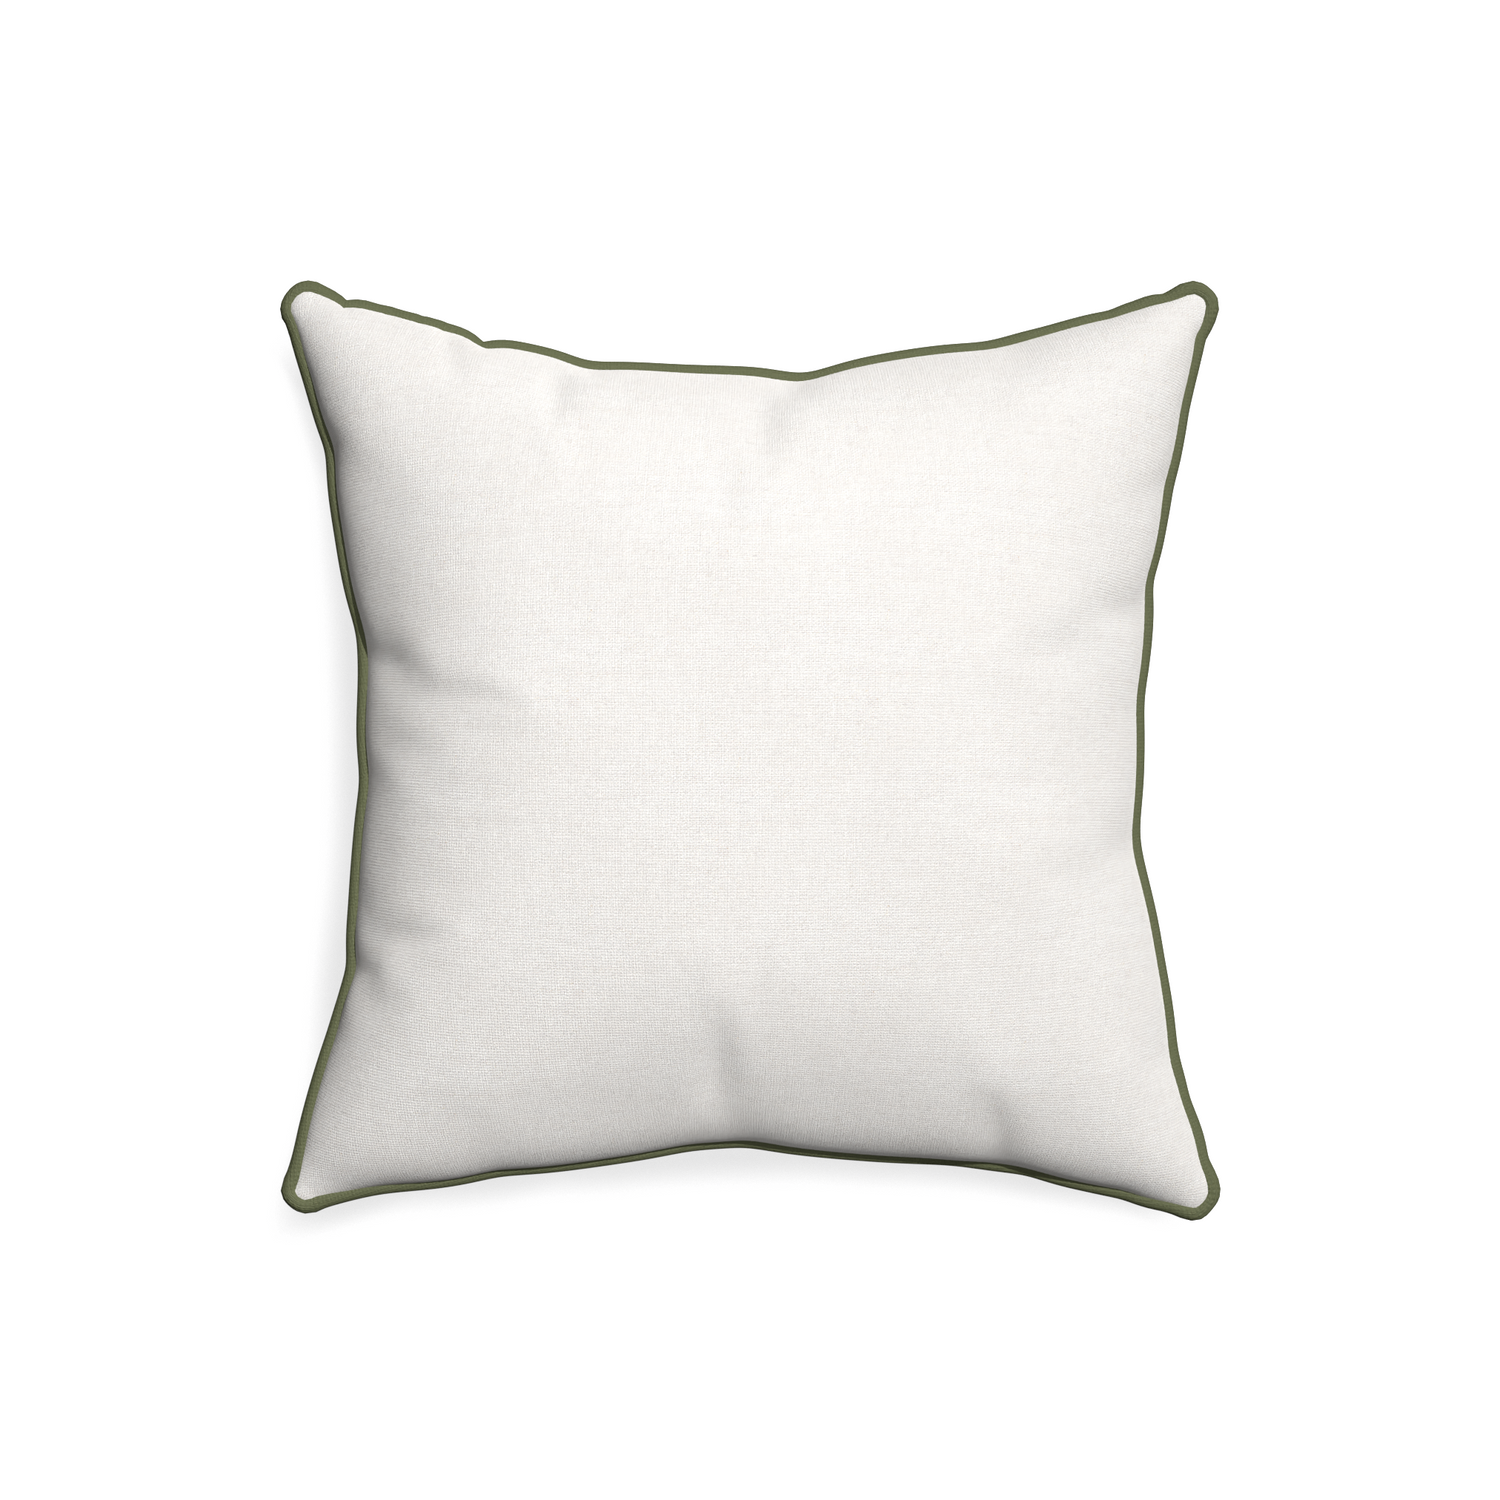 20-square flour custom pillow with f piping on white background